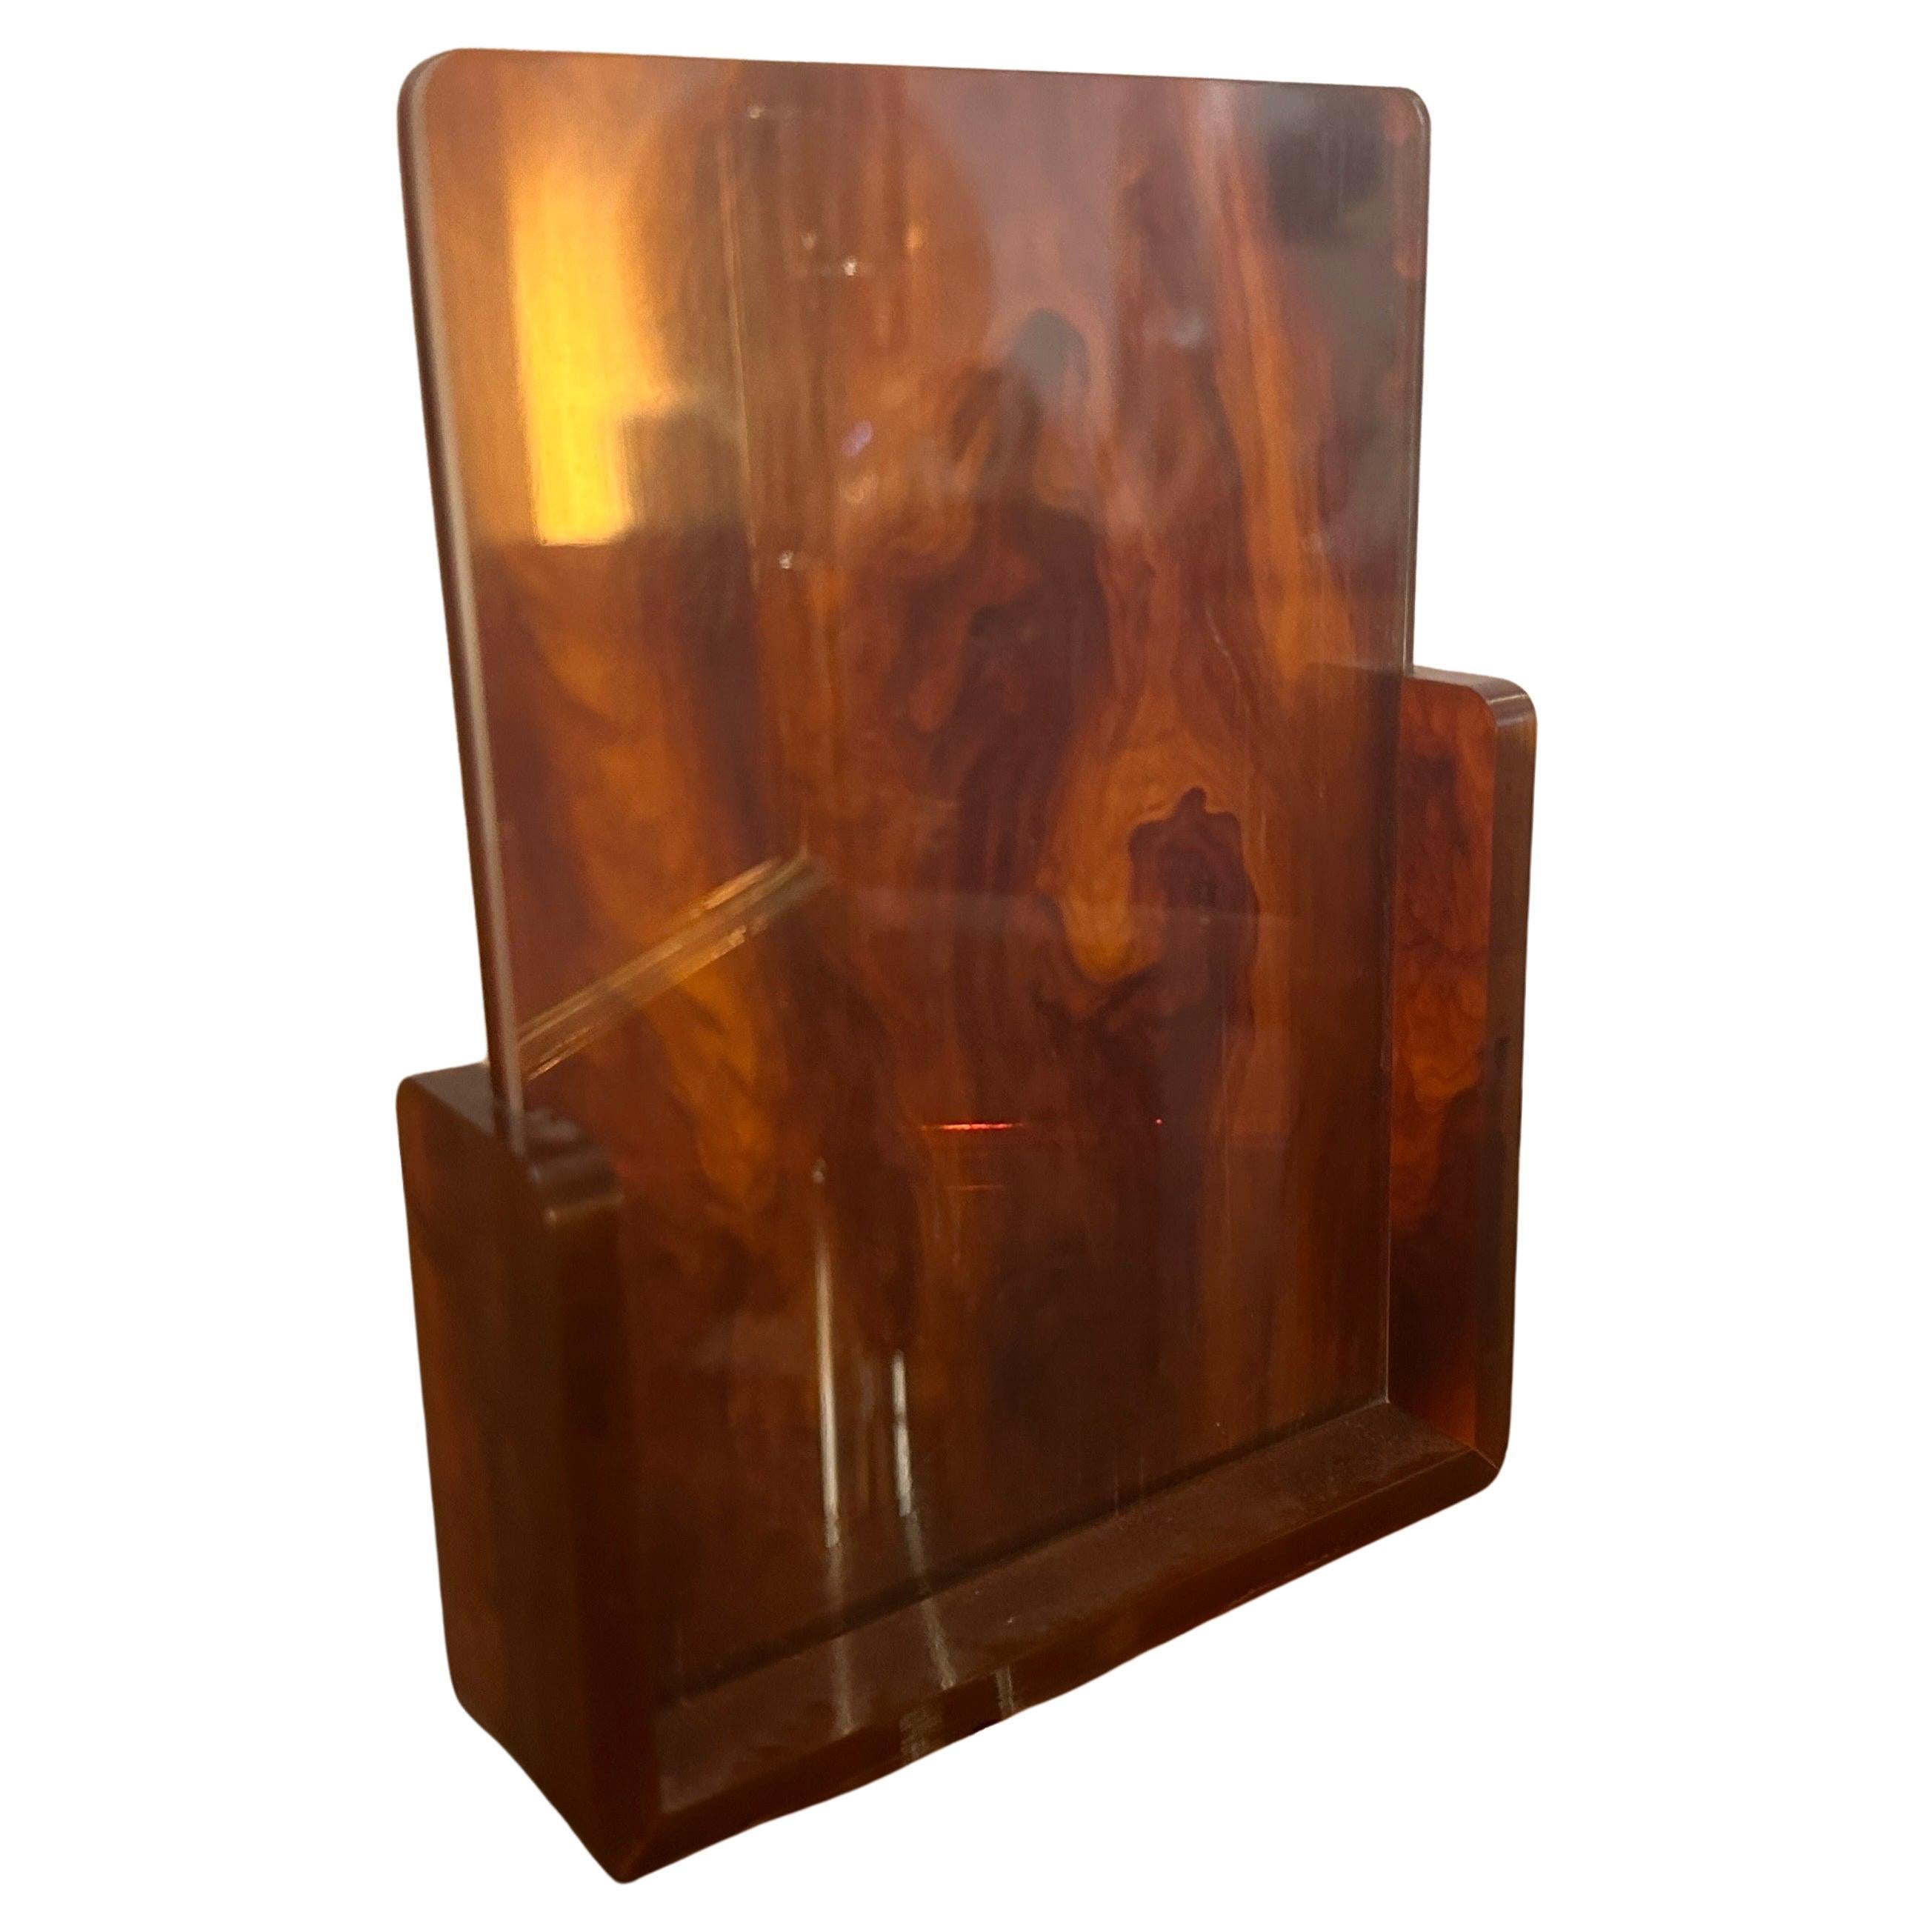 This 1970s Picture Frame is a stylish and distinctive piece of decor that reflects the design trends of its era. The frame is crafted from Lucite, a type of acrylic glass known for its transparency, durability, and lightweight properties. It